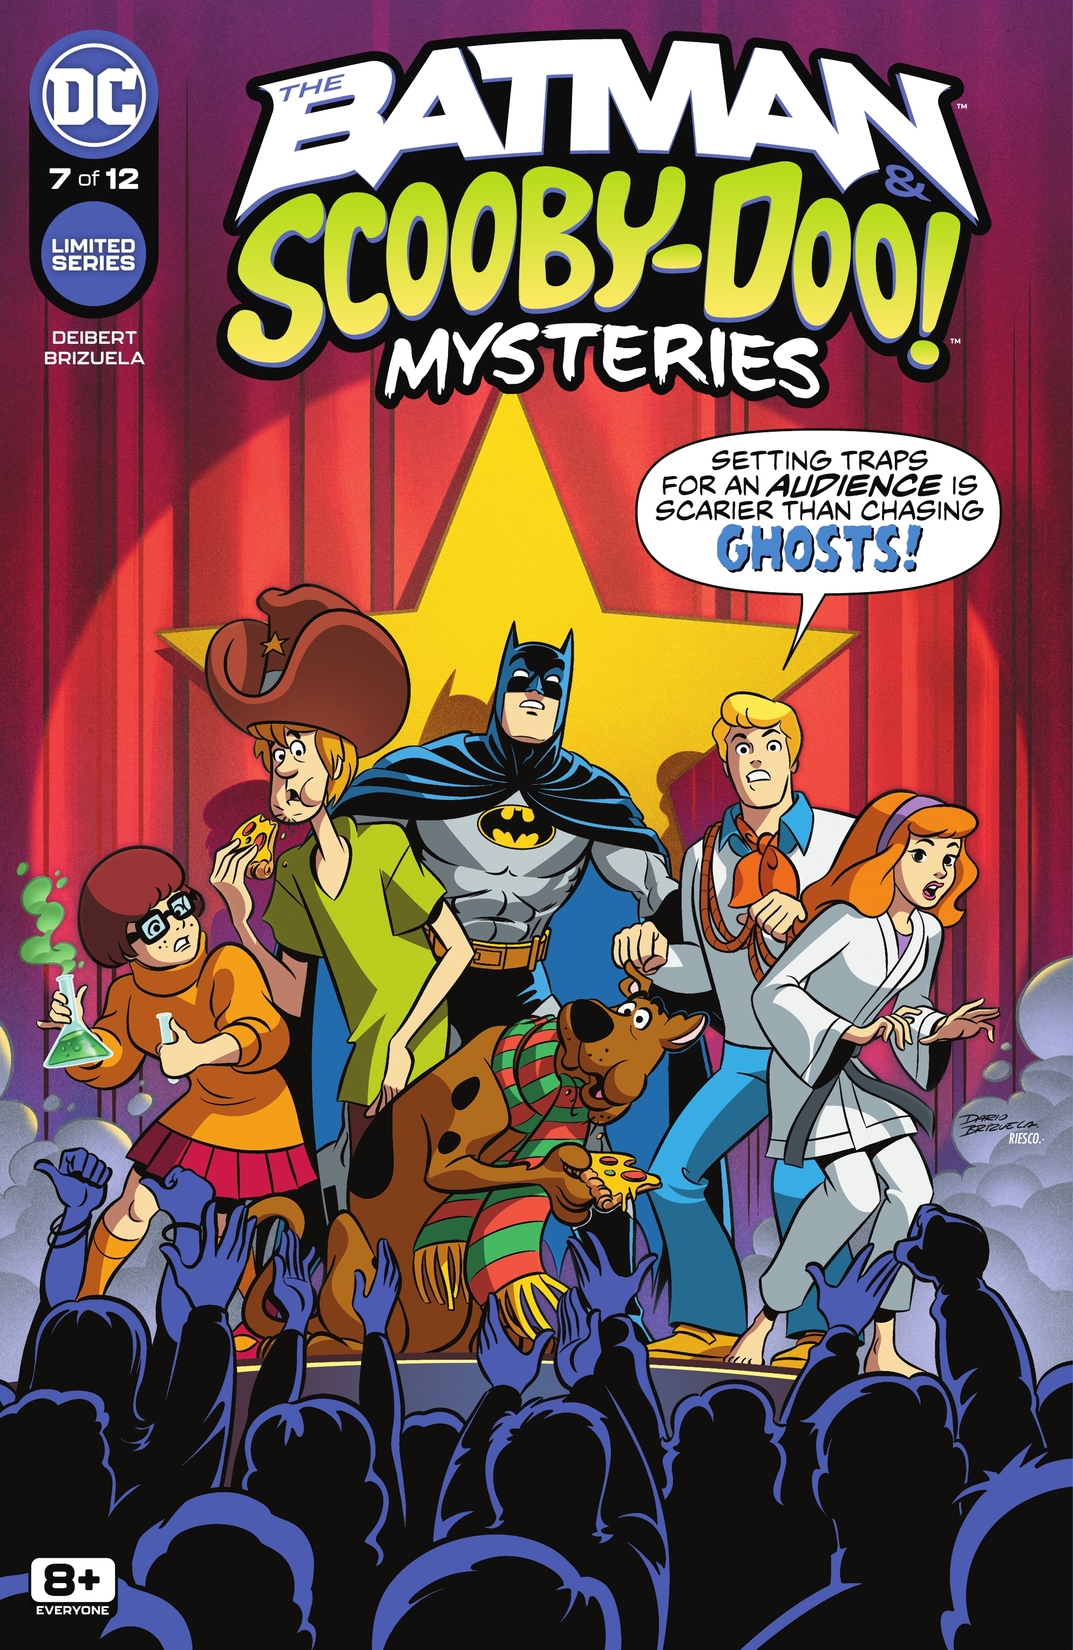 The Batman & Scooby-Doo Mysteries #7 preview images